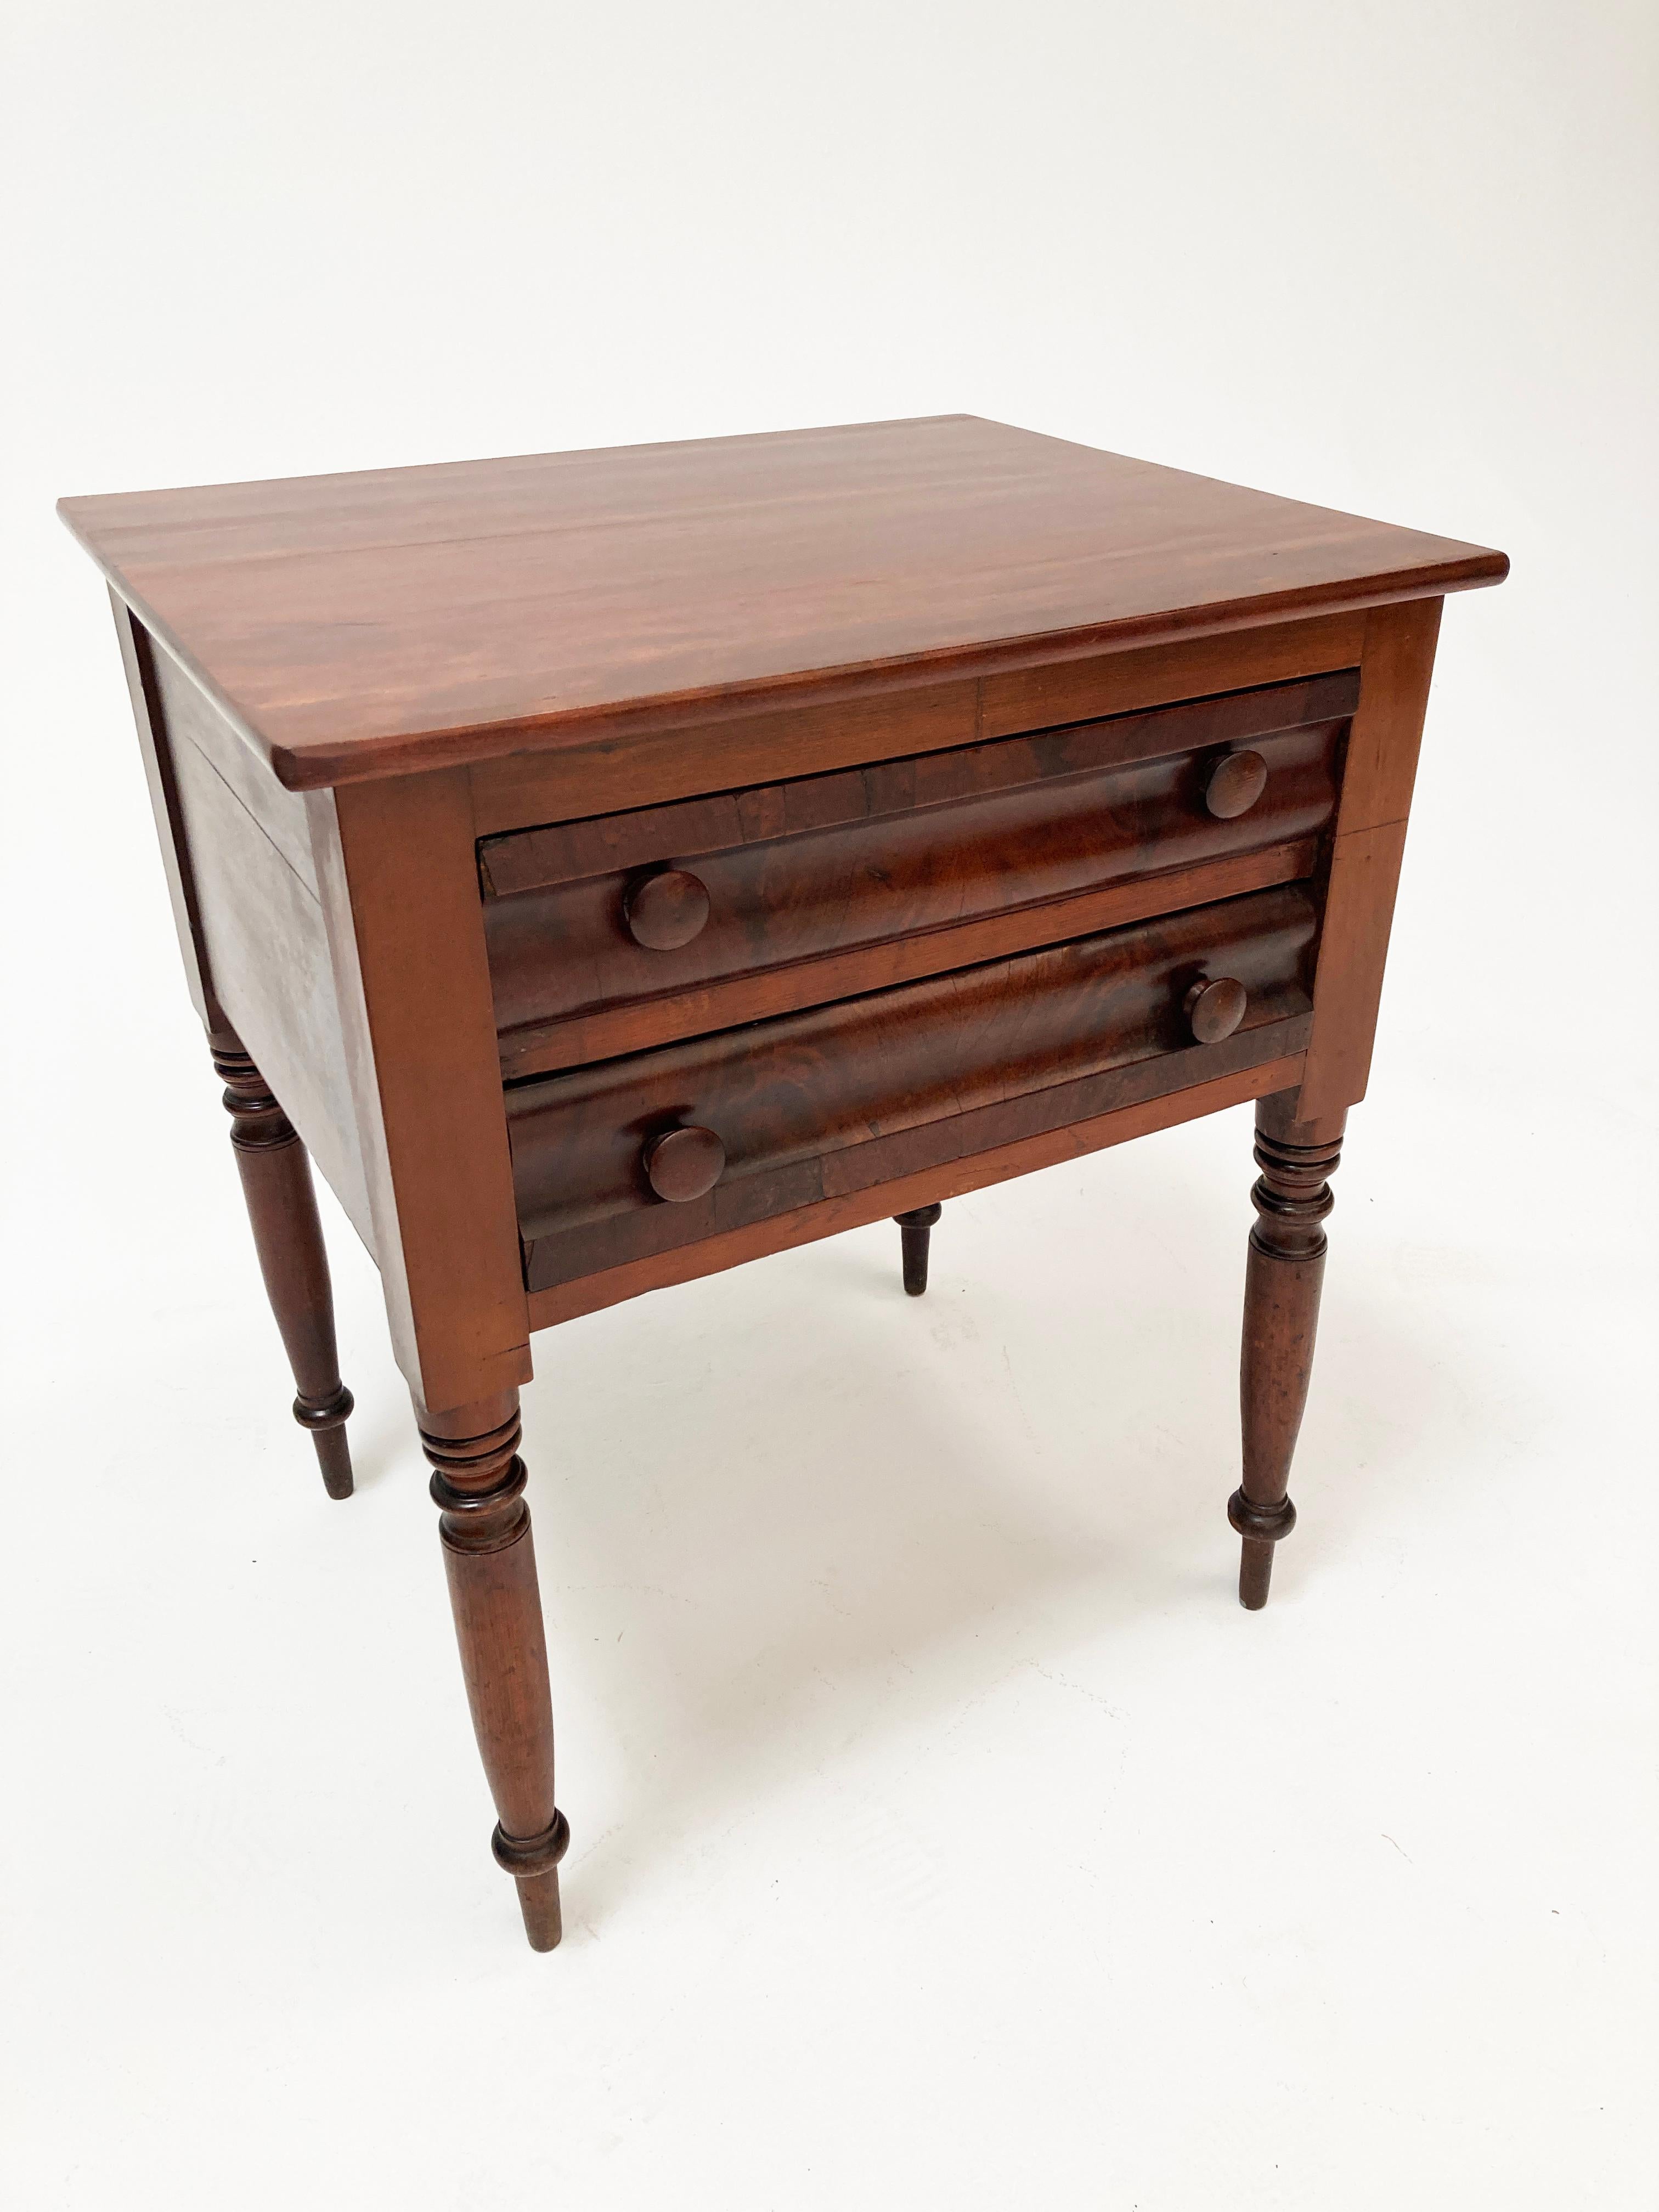 This gorgeous American Federal period table is a beautiful reflection of the early 1800's. With hand turned legs, unique irregular lines and curves that display a master builder's hand tools, and the warmly stained and richly figured mahogany wood,